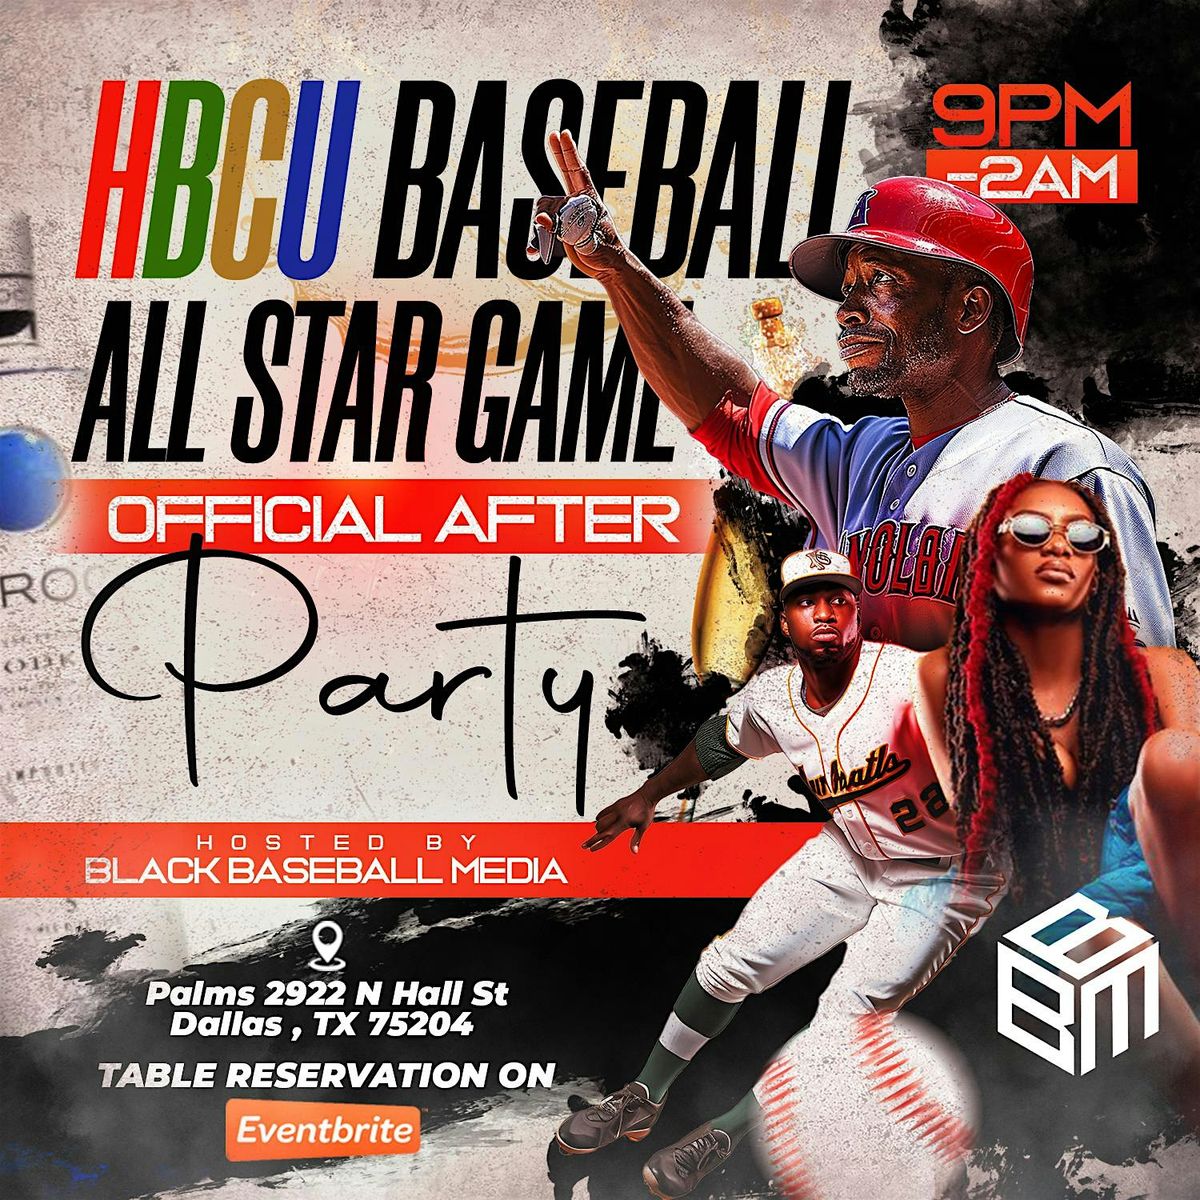 HBCU Baseball All Star Game Official After Party